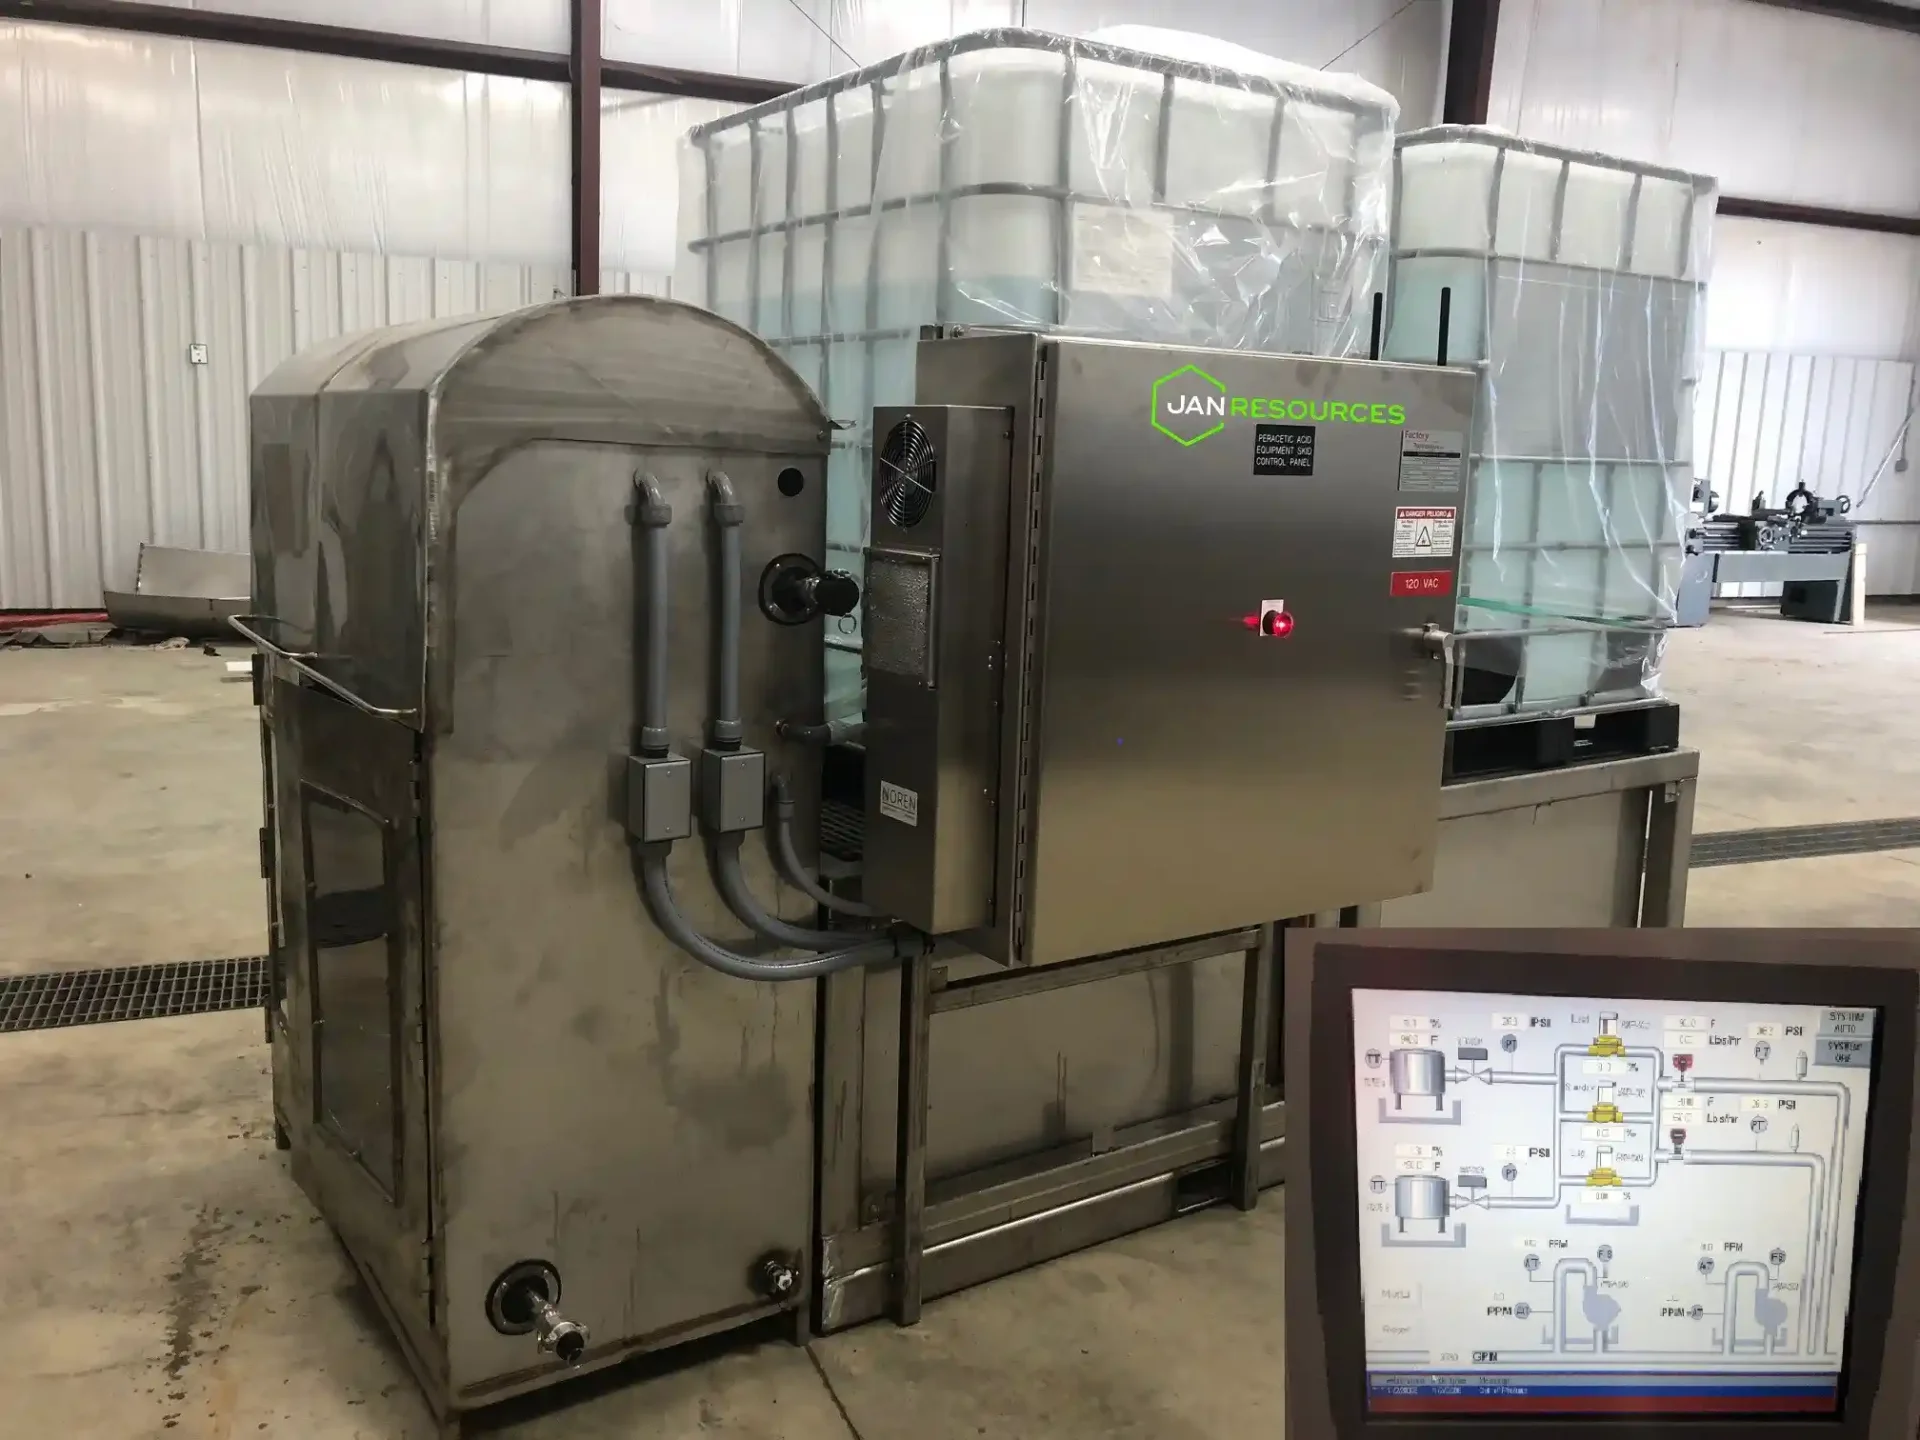 New-fully-automated-injection-skid-w-inset-9.12.18-Copy